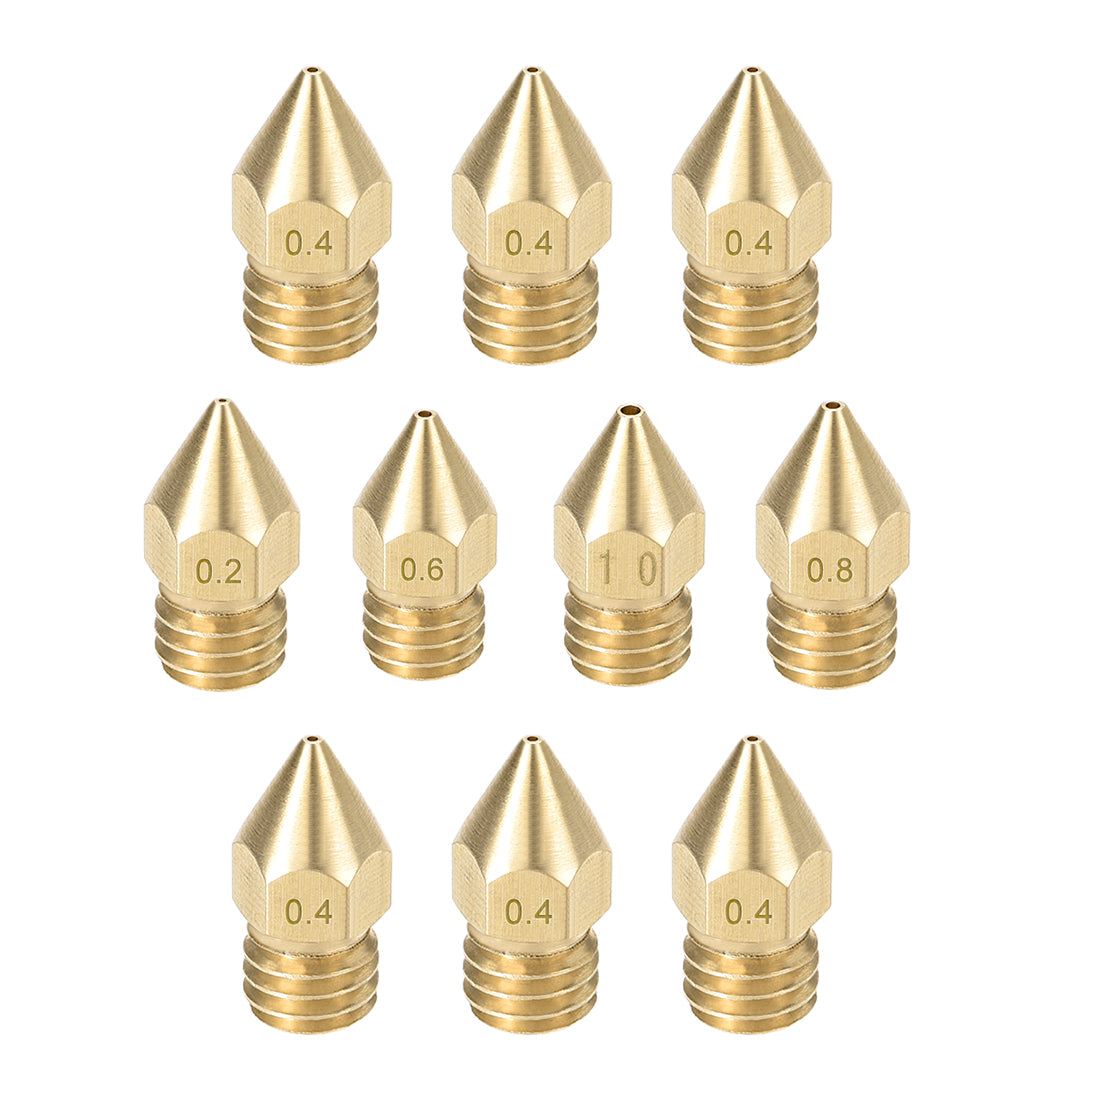 uxcell Uxcell 3D Printer Nozzle Fit for MK8,for 1.75mm Filament Brass,0.2mm - 1mm Total 10pcs